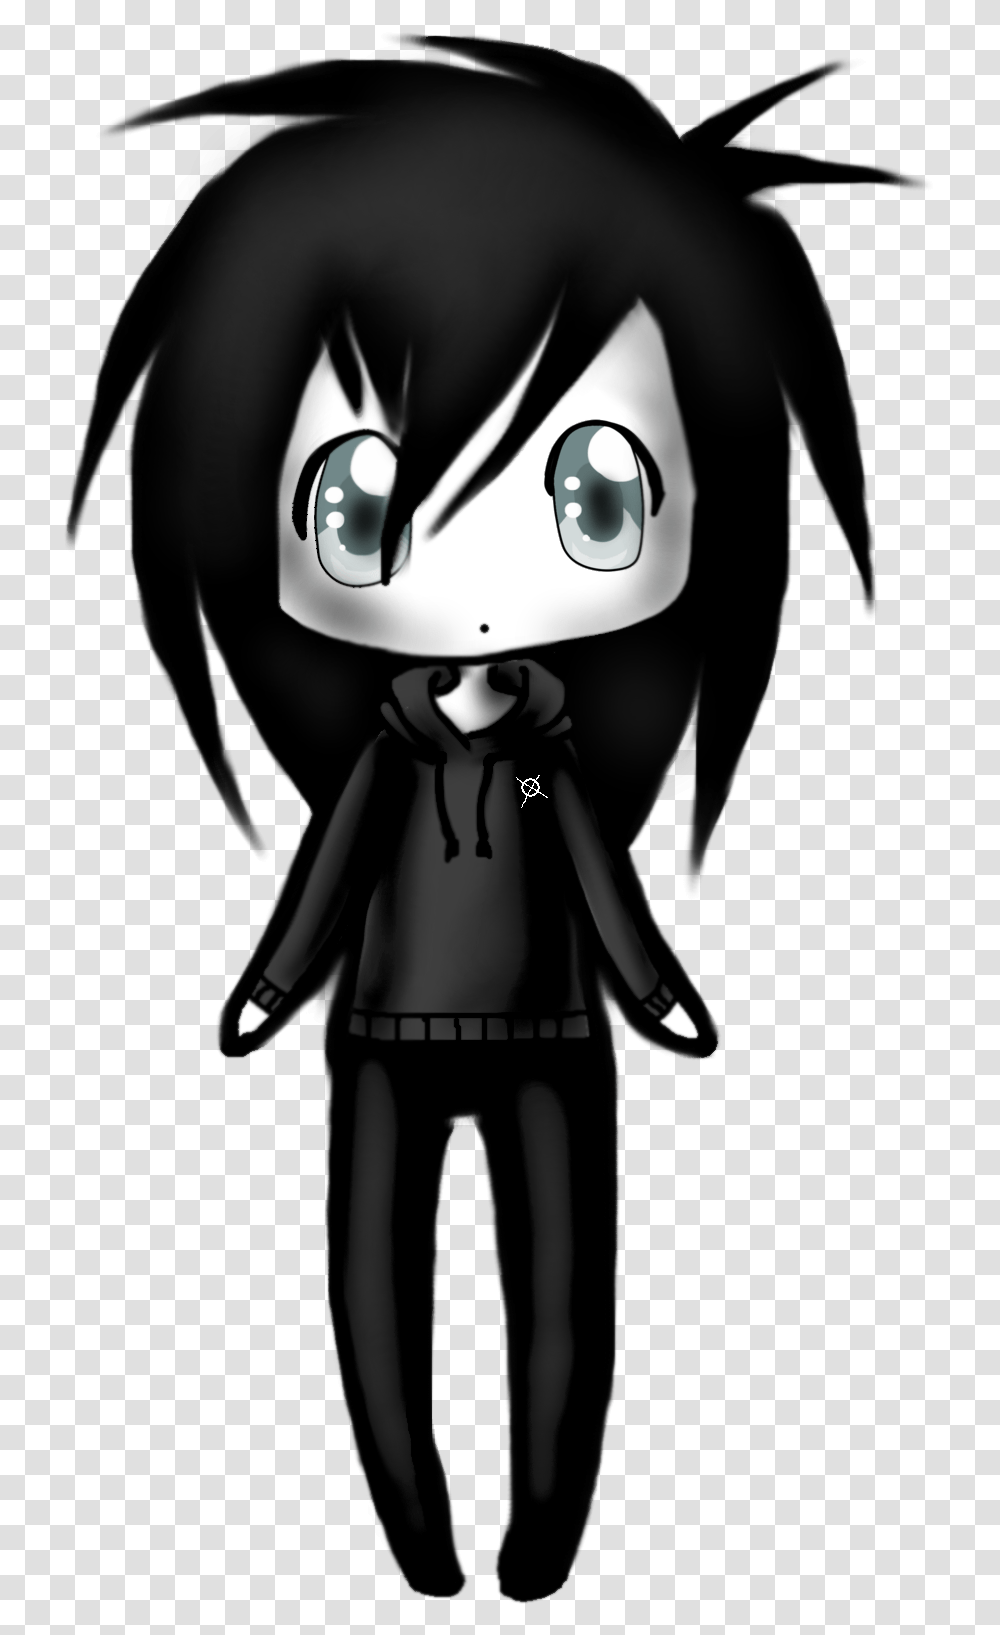 Jeff The Killer Creepypasta Cute, Toy, Person, Human, Doll Transparent Png